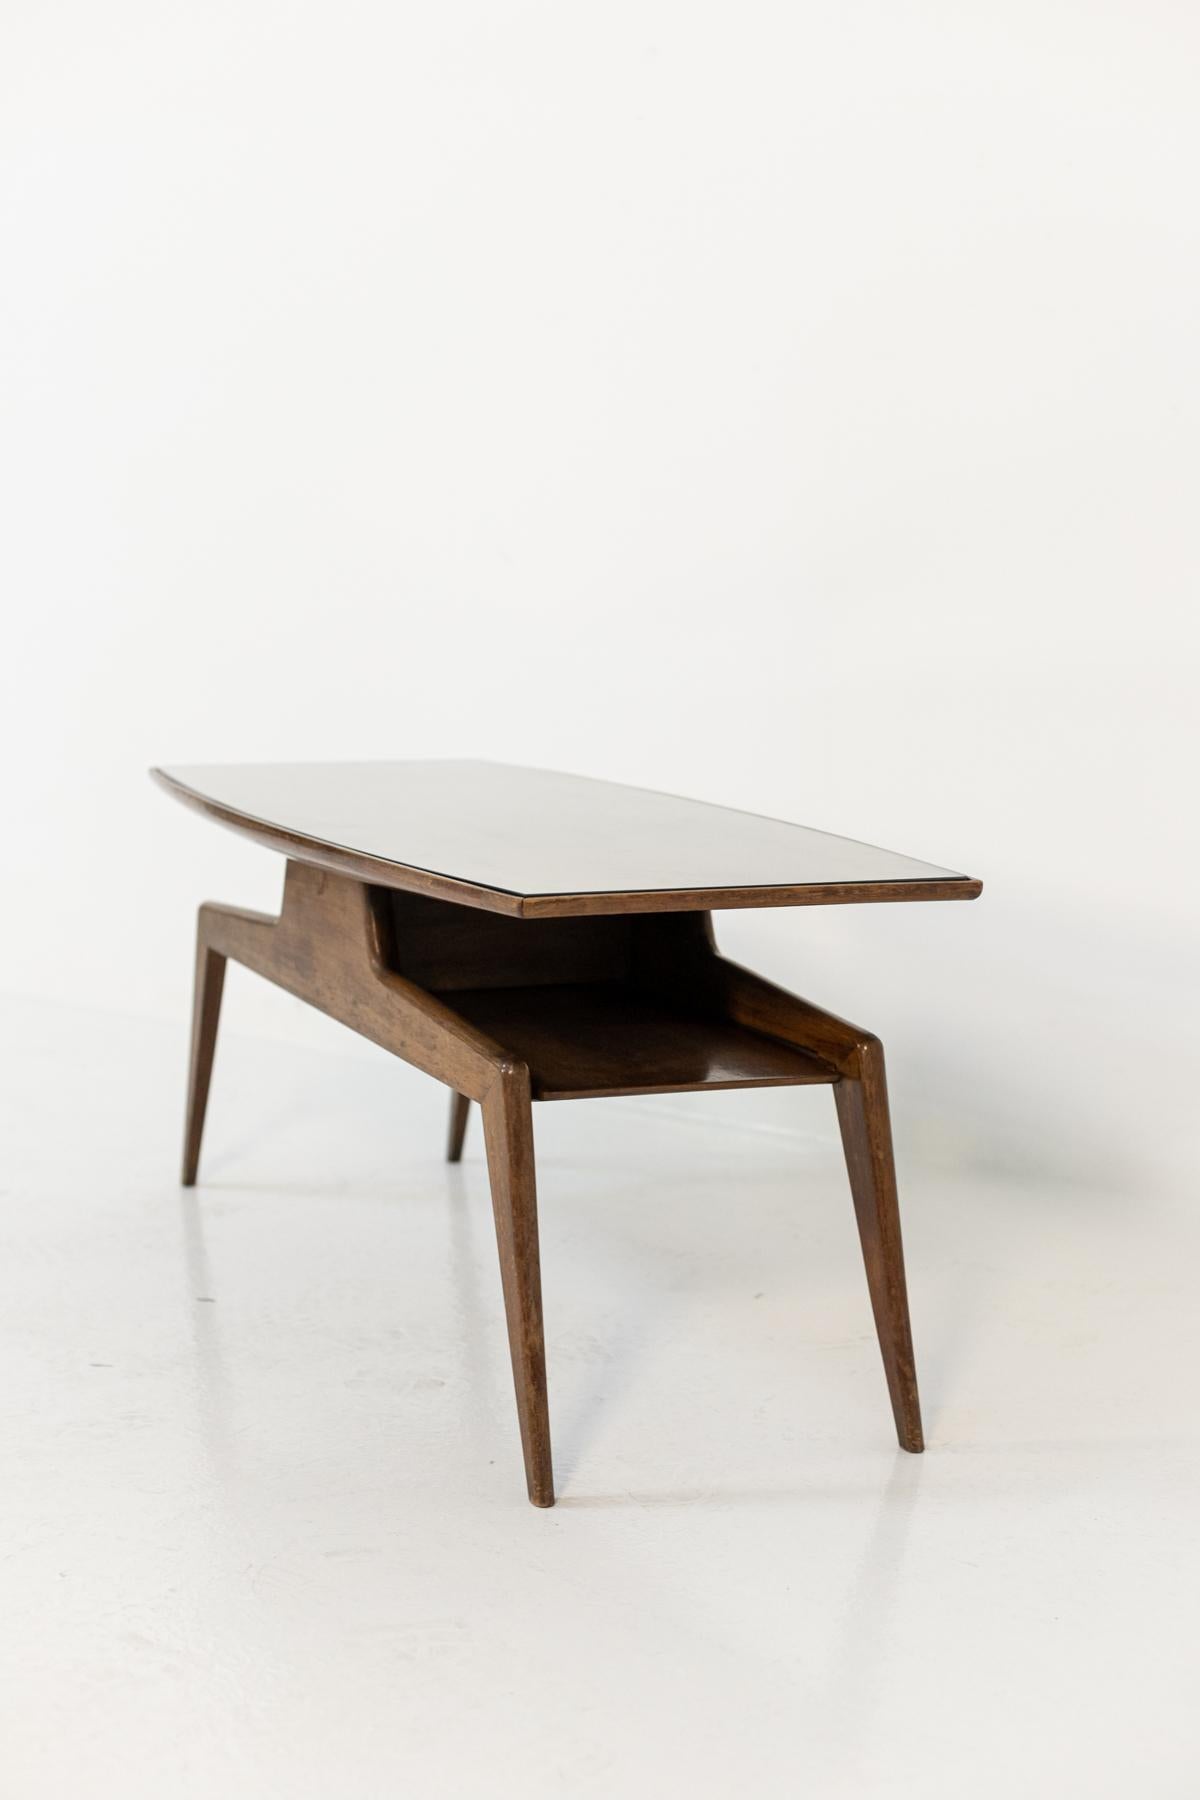 Rare Coffee Table Attr. to Gio Ponti in Walnut Wood and Glass 1